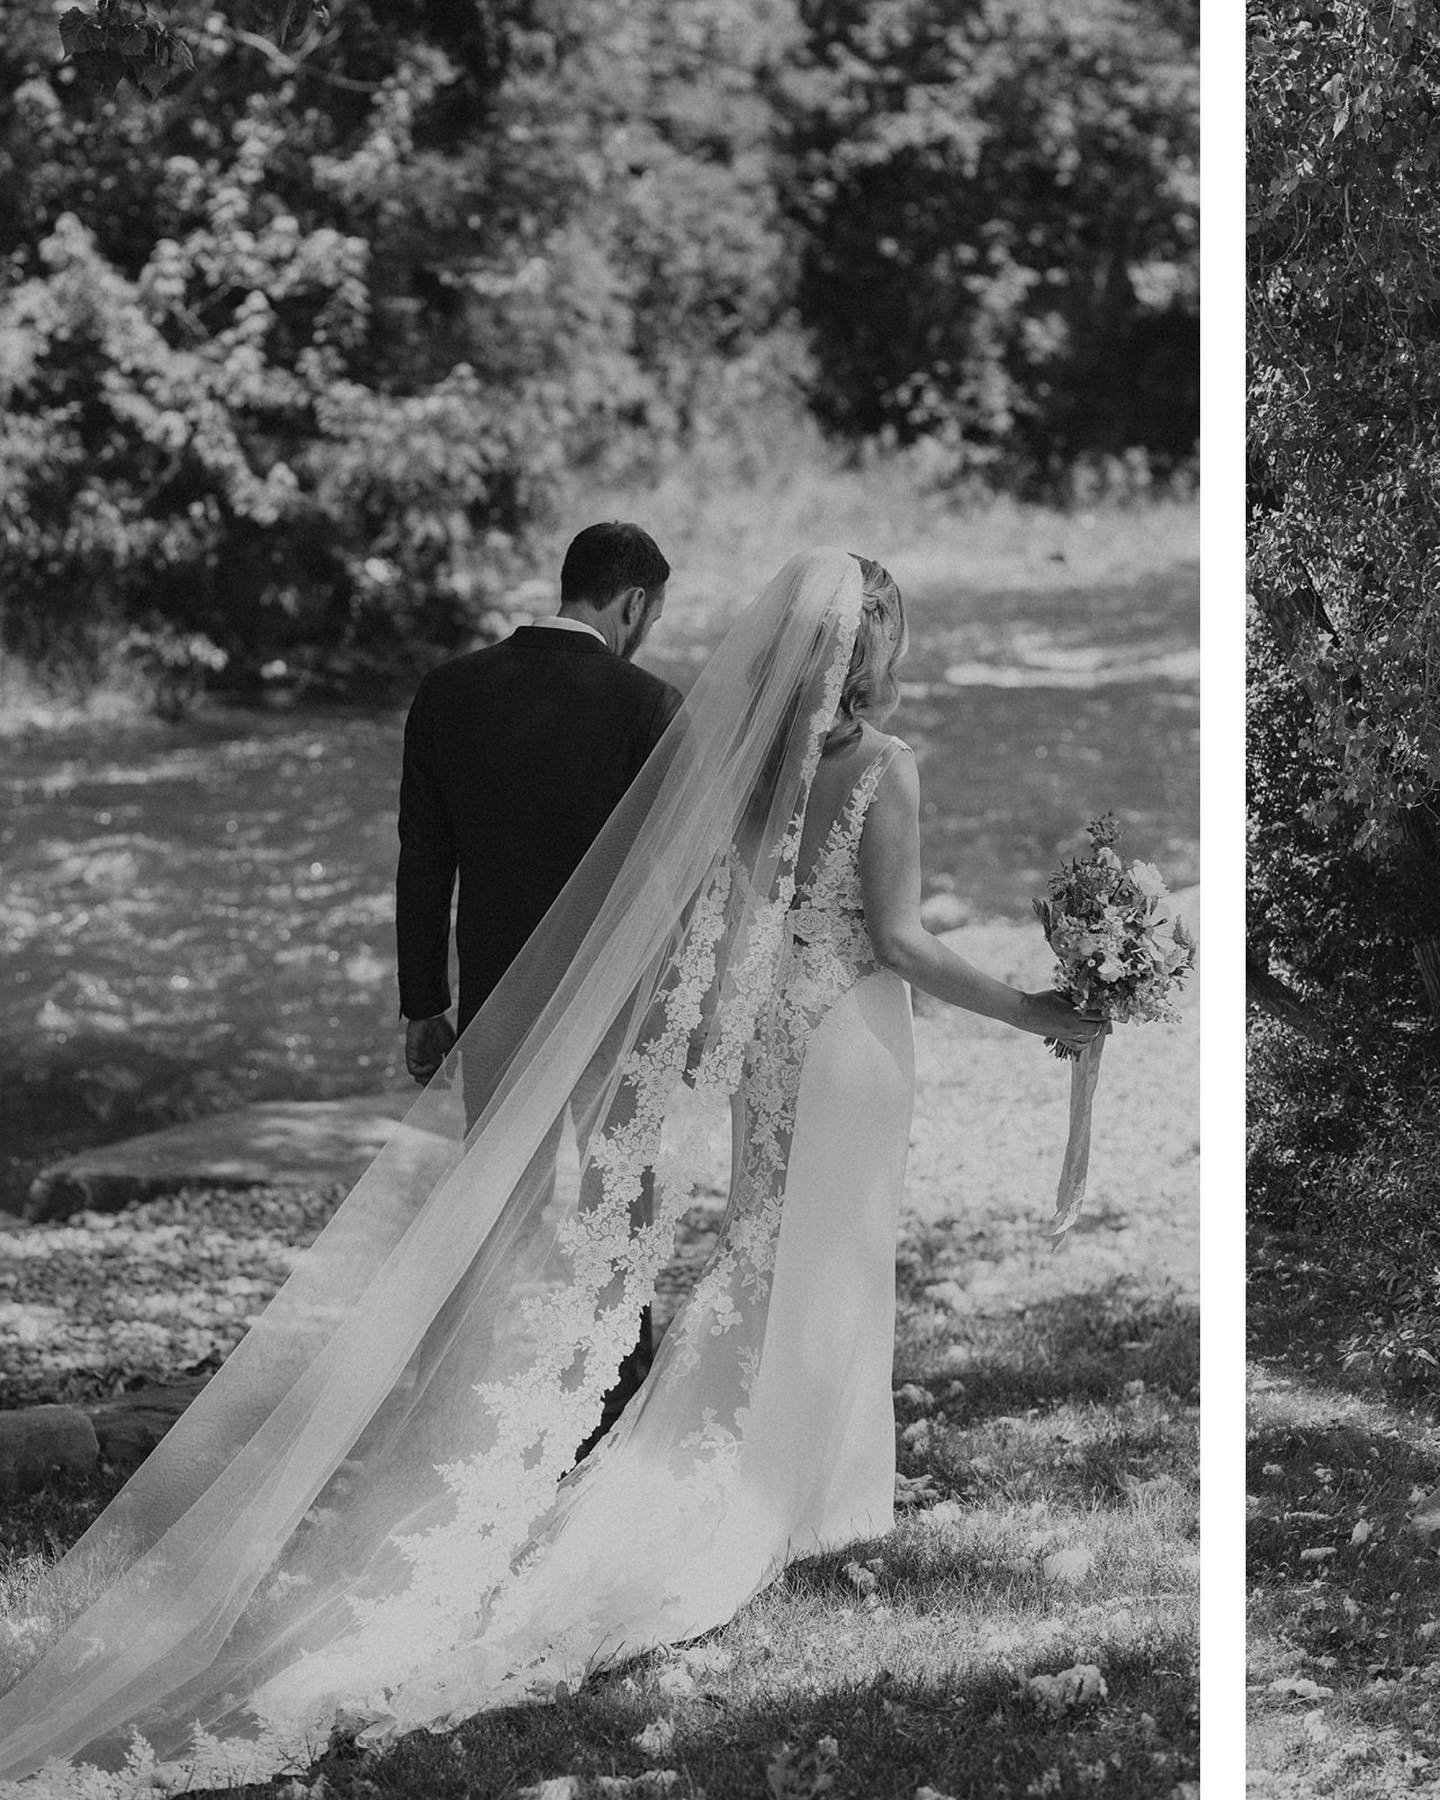 A few b&amp;w favorites from this day! 🖤🤍
.
.
.
.
#riversidewedding #boulderwedding #boulderweddingphotographer #destinationweddingphotographer #timelesswedding #blackandwhite